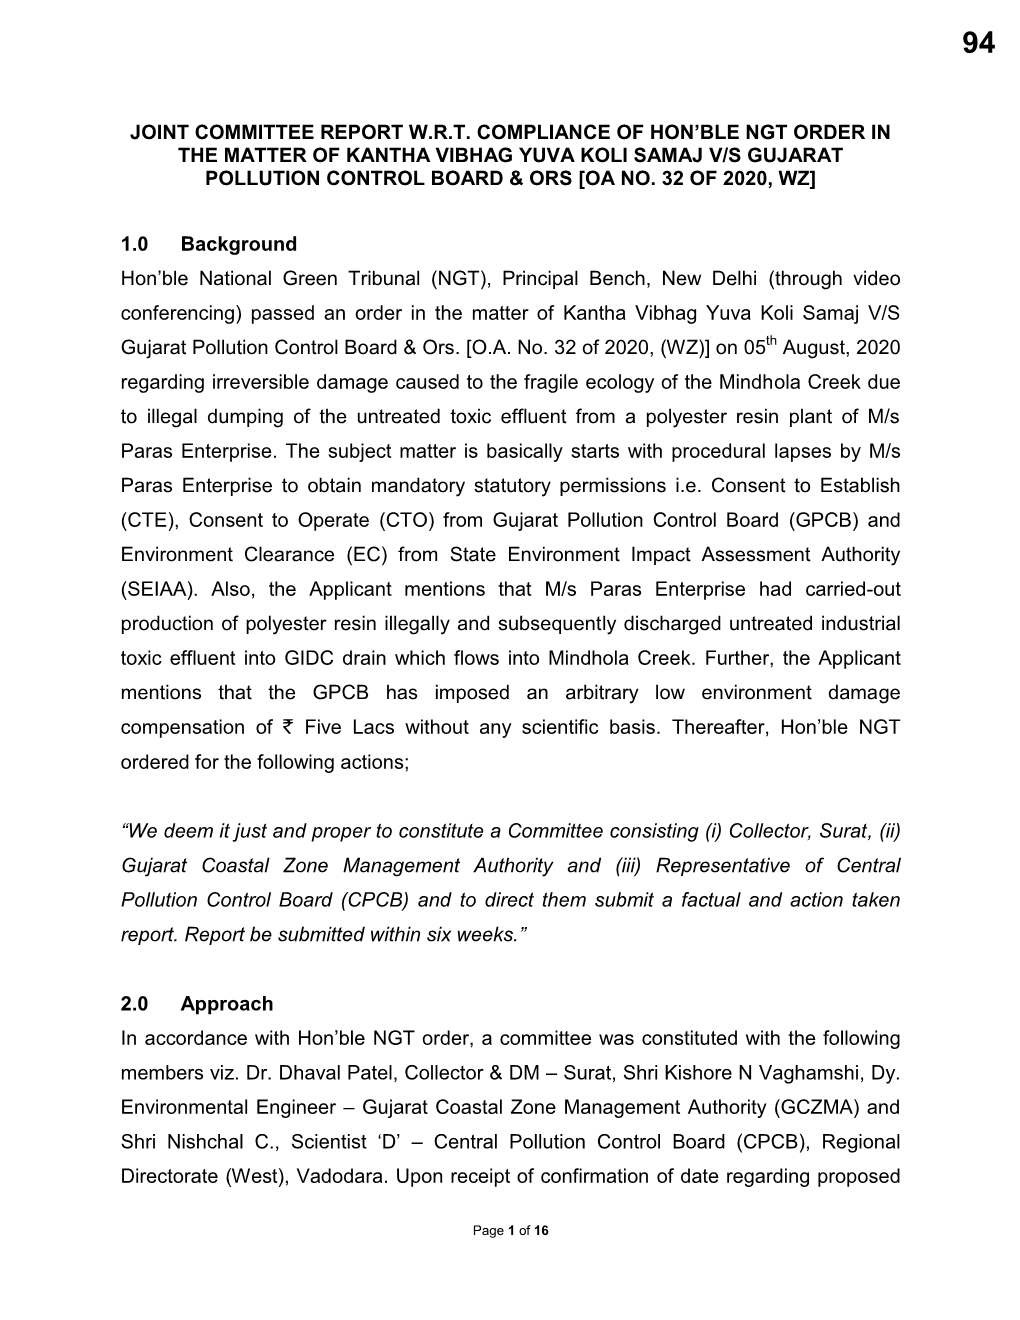 Joint Committee Report W.R.T. Compliance of Hon'ble Ngt